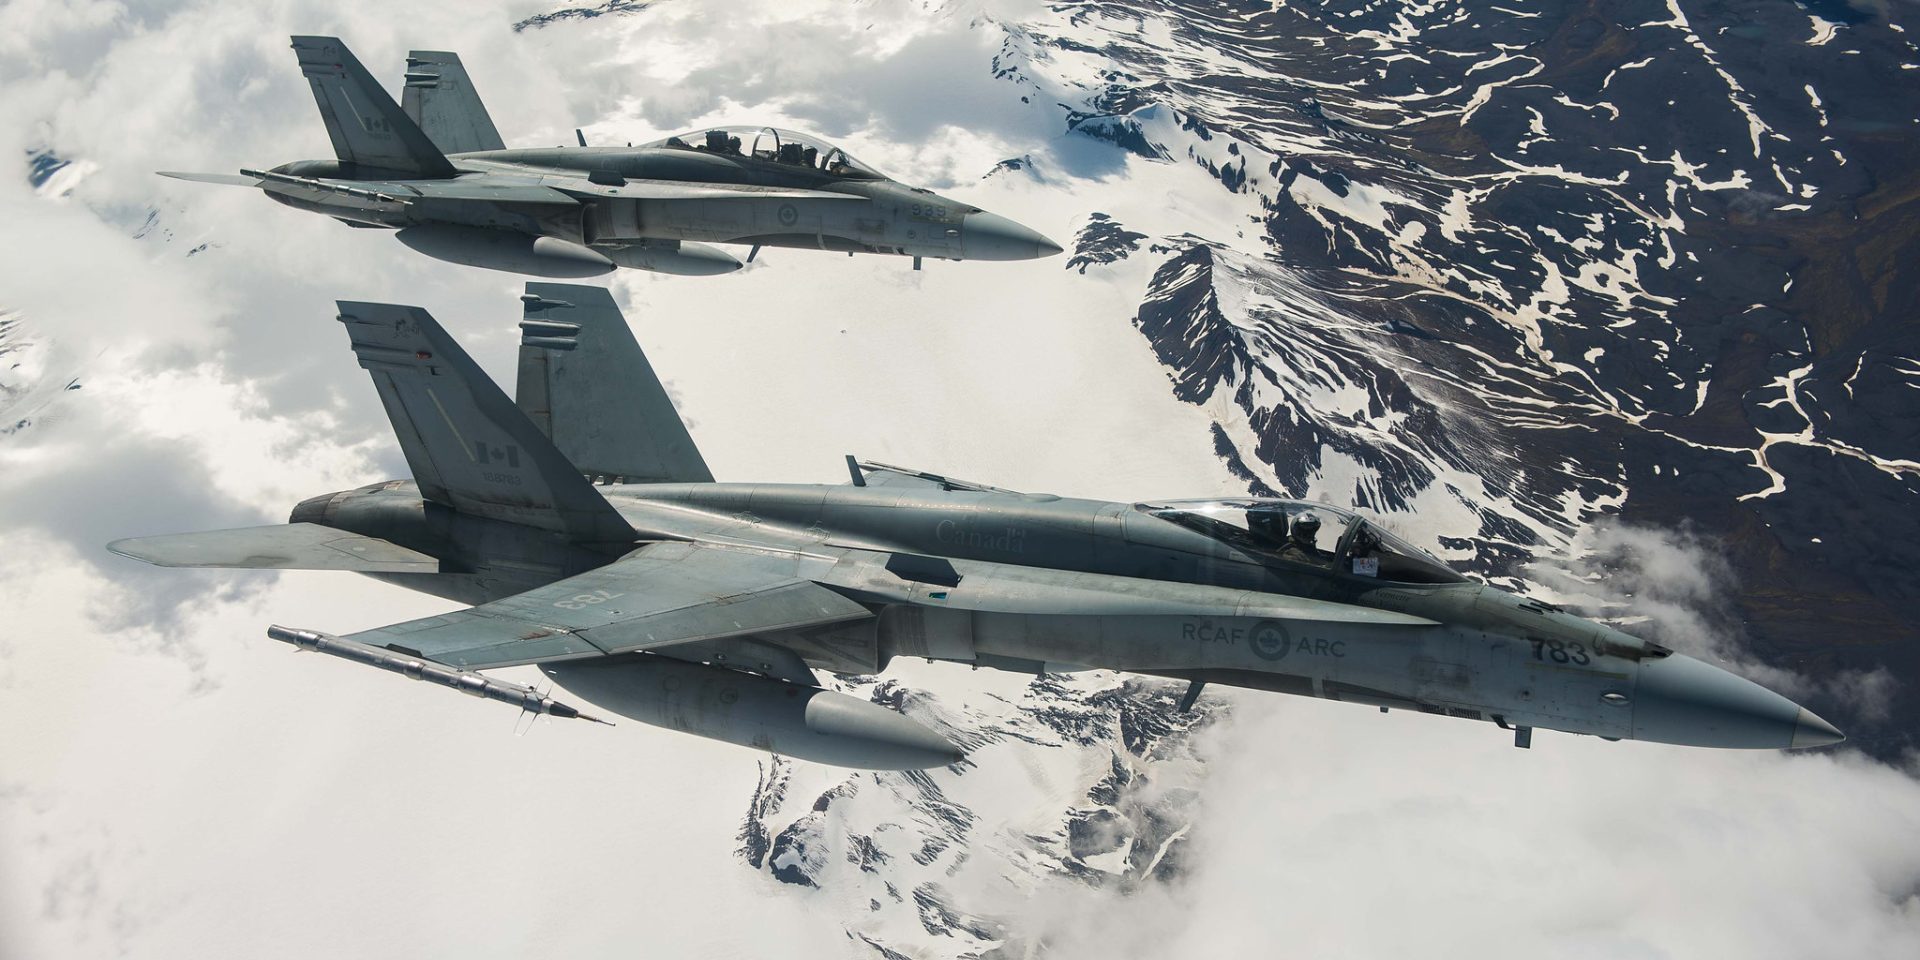 Royal Canadian Air Force CF-188 Hornet fighters fly over Iceland on May 31, 2017, during an Operation Reassurance surveillance mission. DND photograph by Corporal Gary Calvé